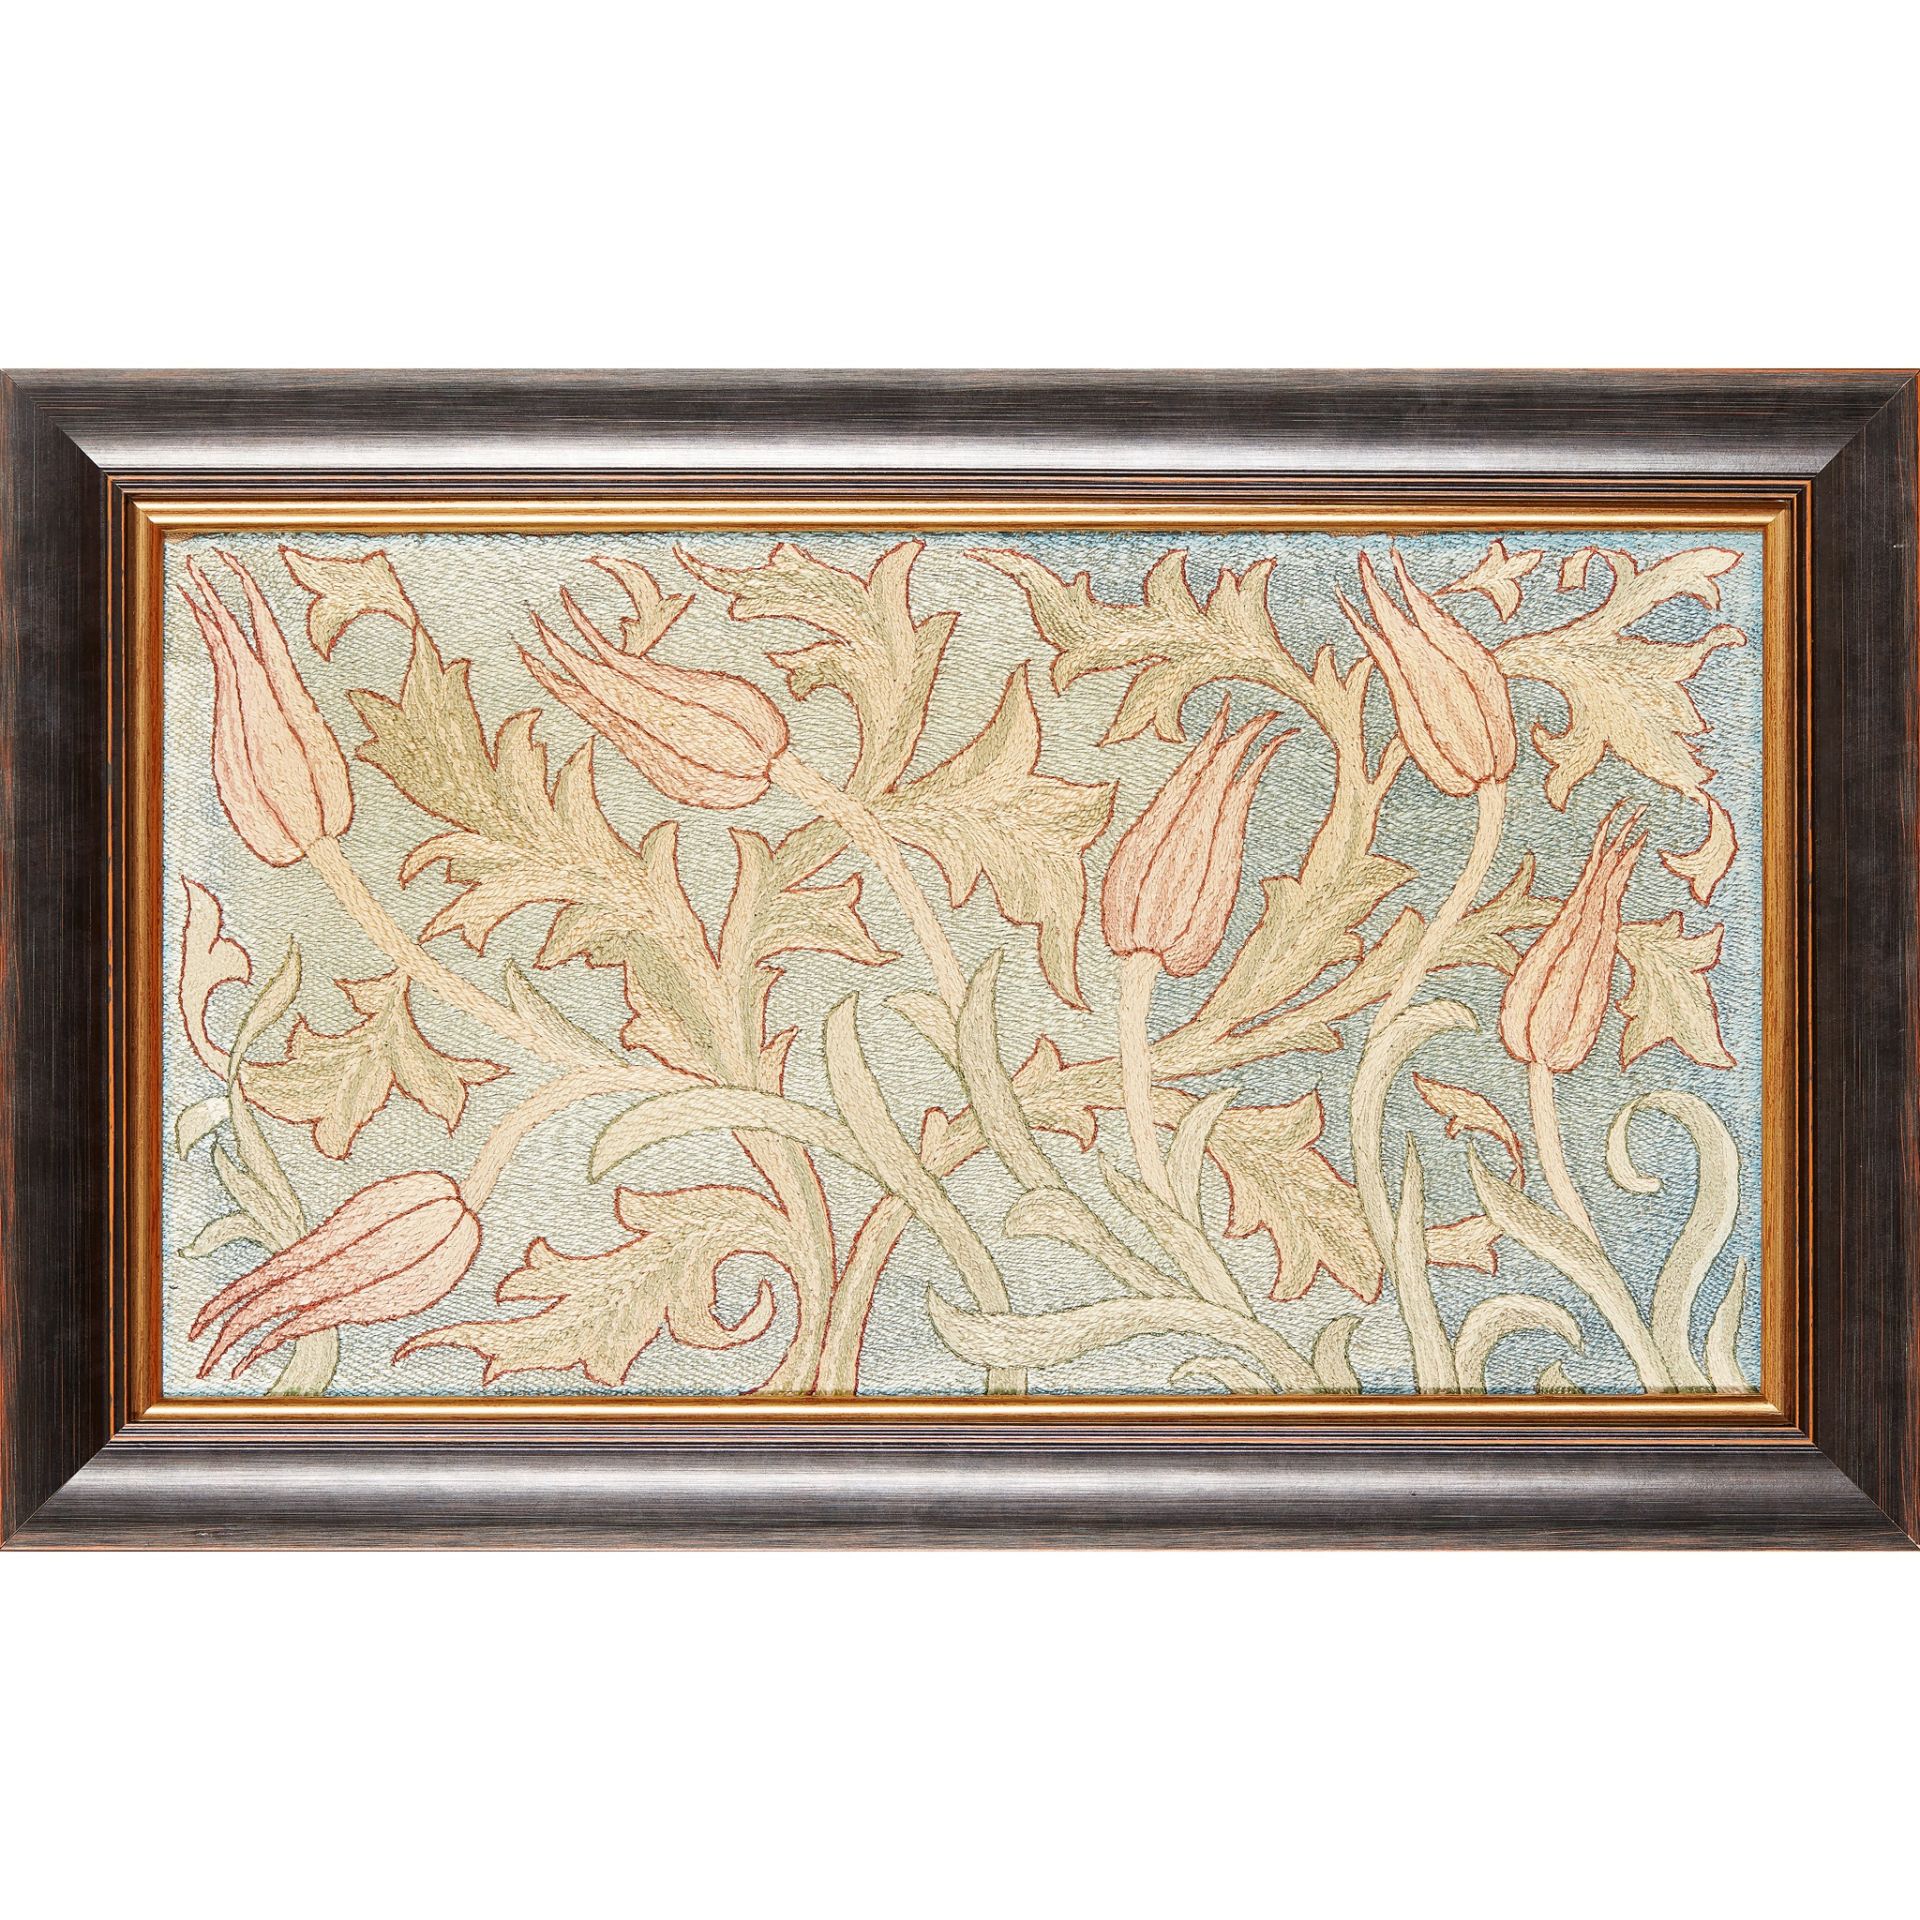 MAY MORRIS (1862-1938) FOR MORRIS & CO. 'TULIP' EMBROIDERED PANEL, CIRCA 1890